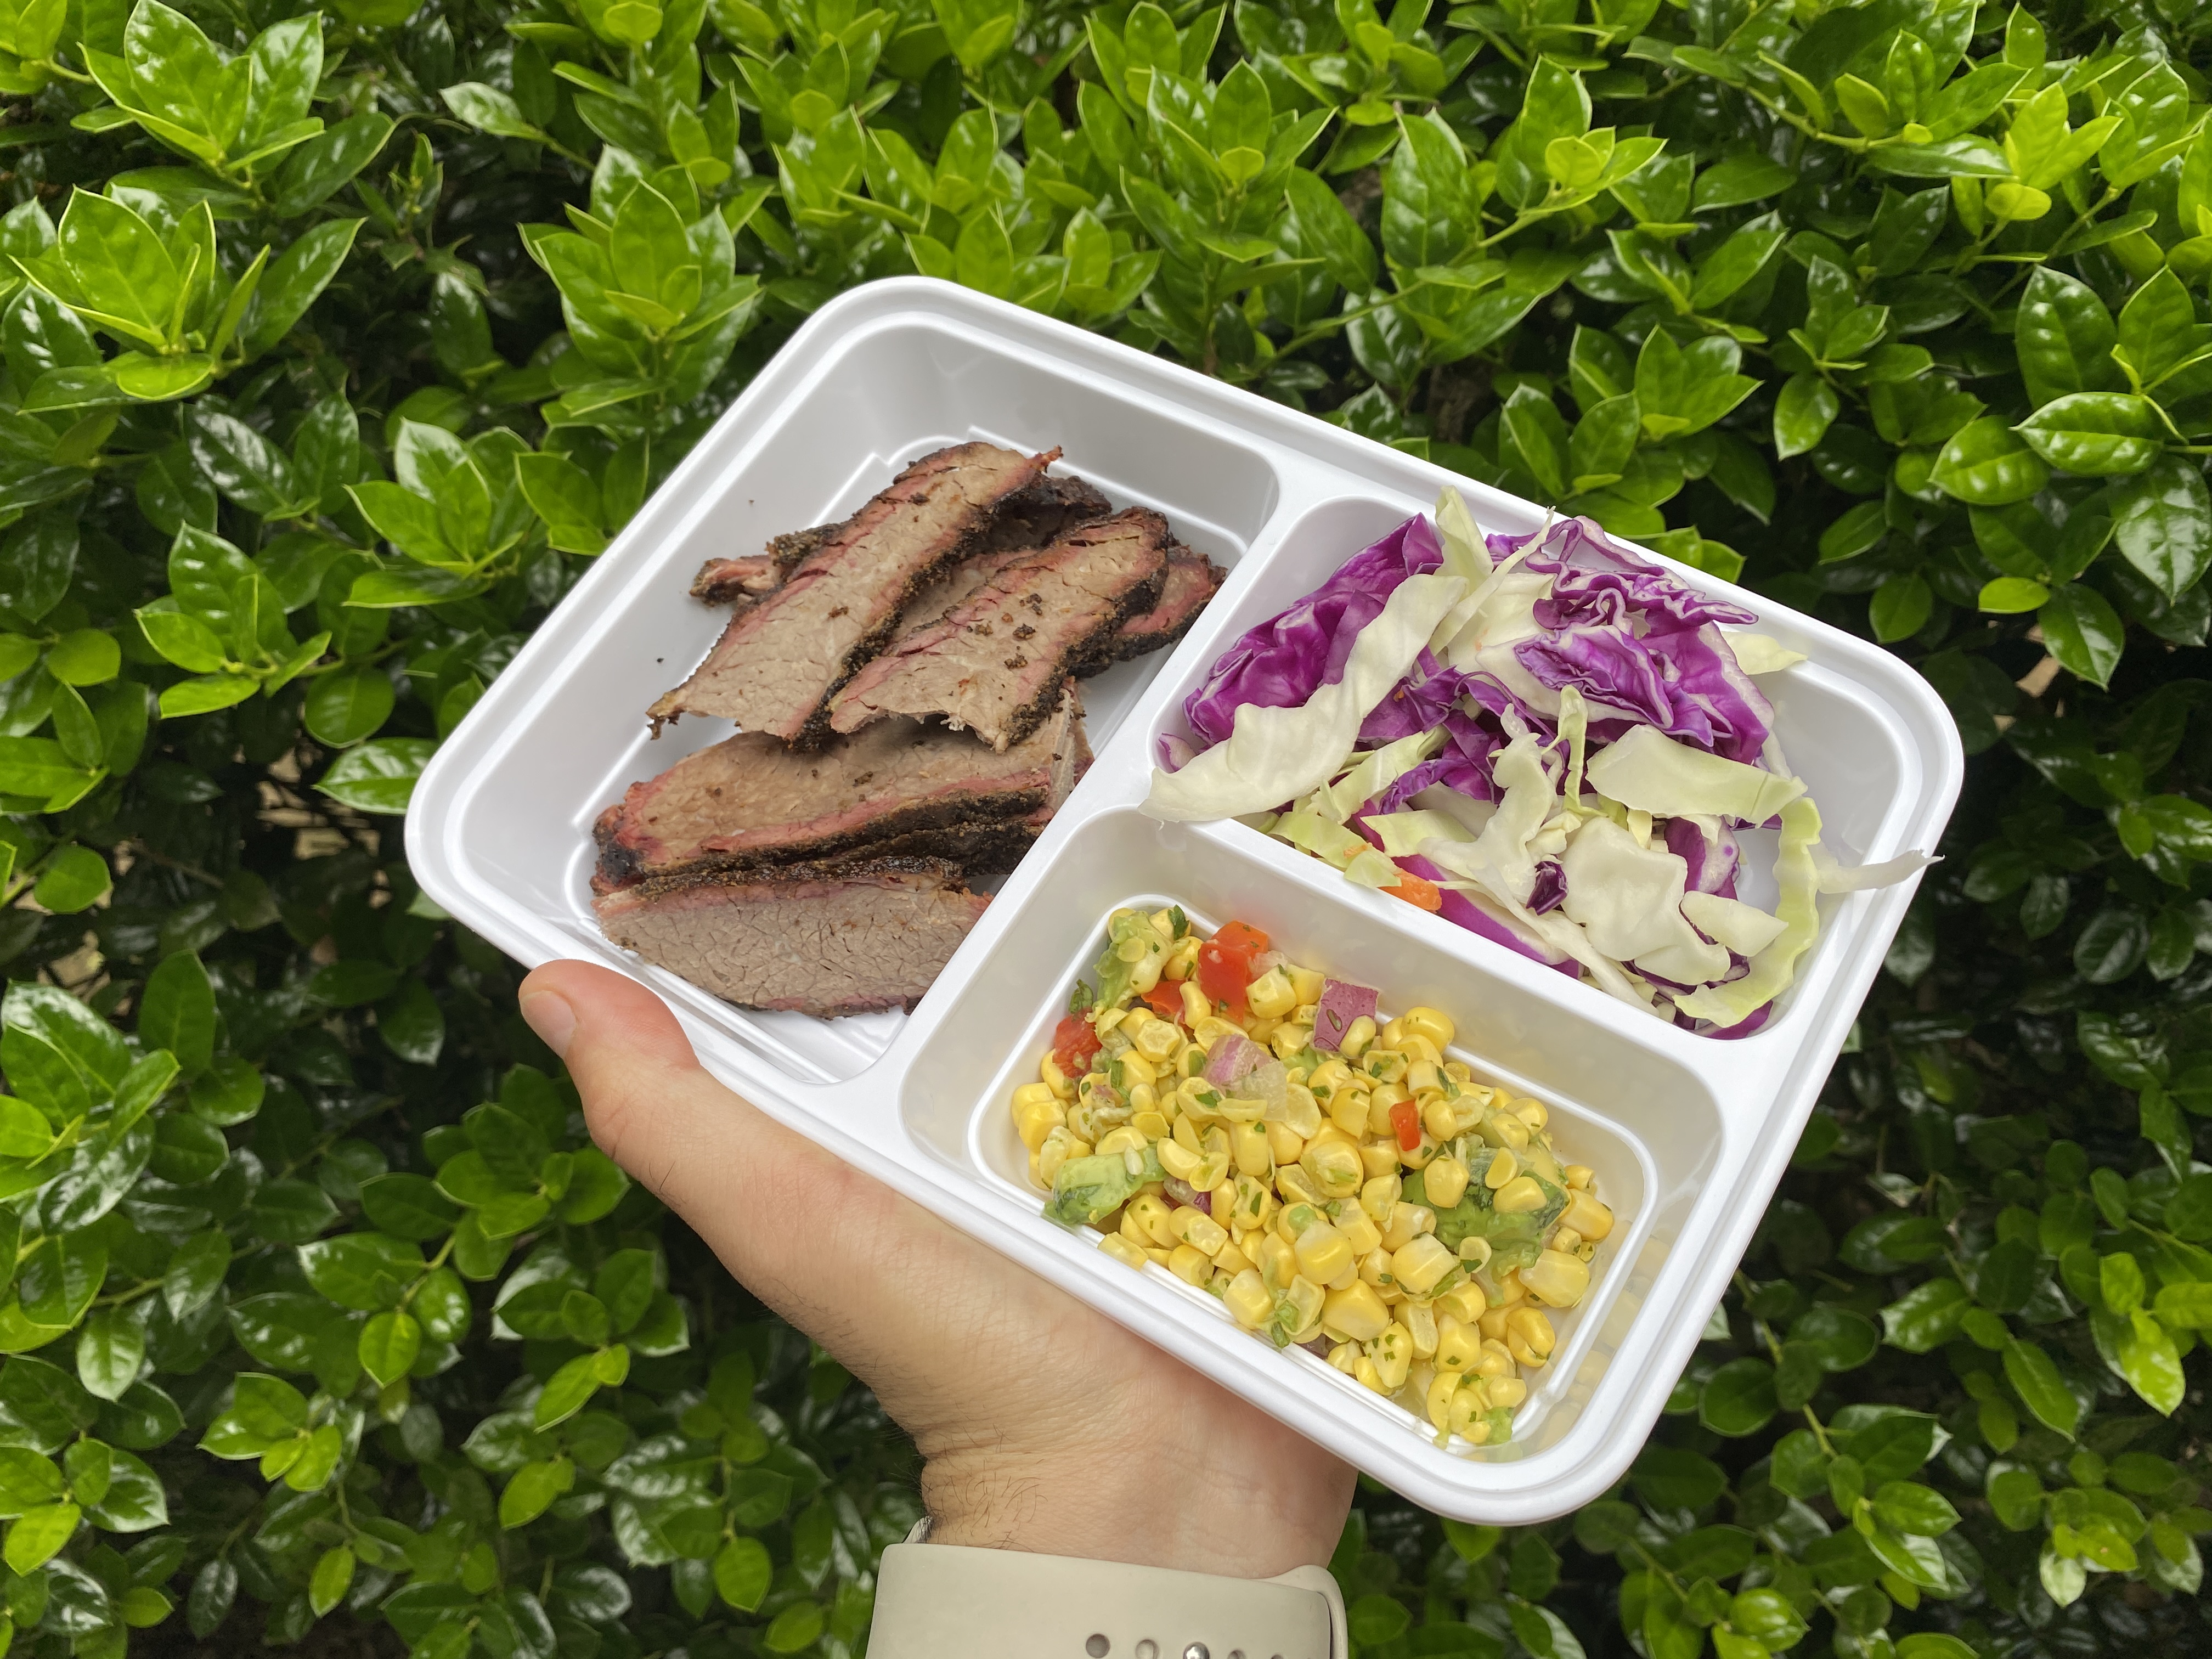 vibrant veggies and sliced brisket in meal prep container